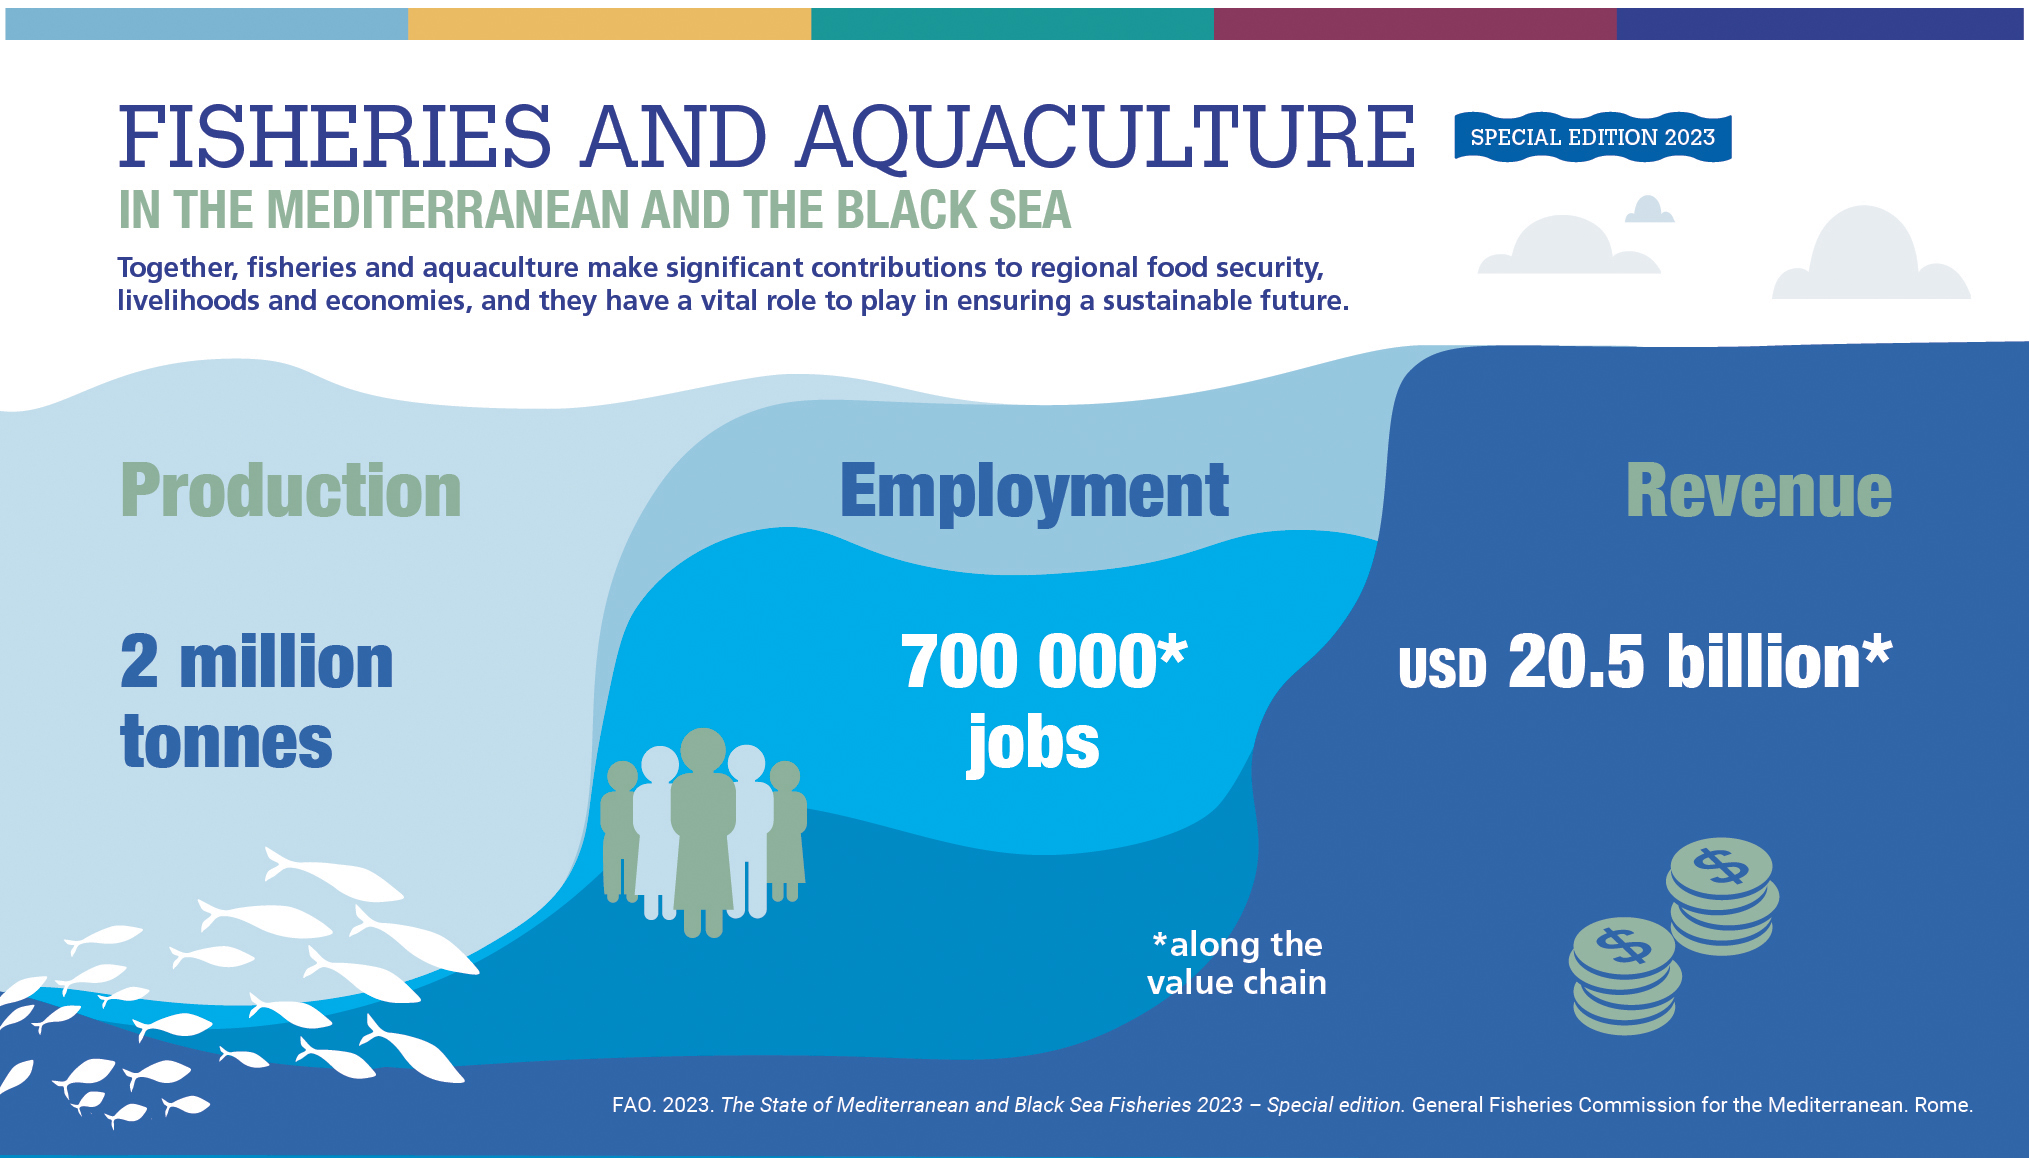 Fisheries and aquaculture